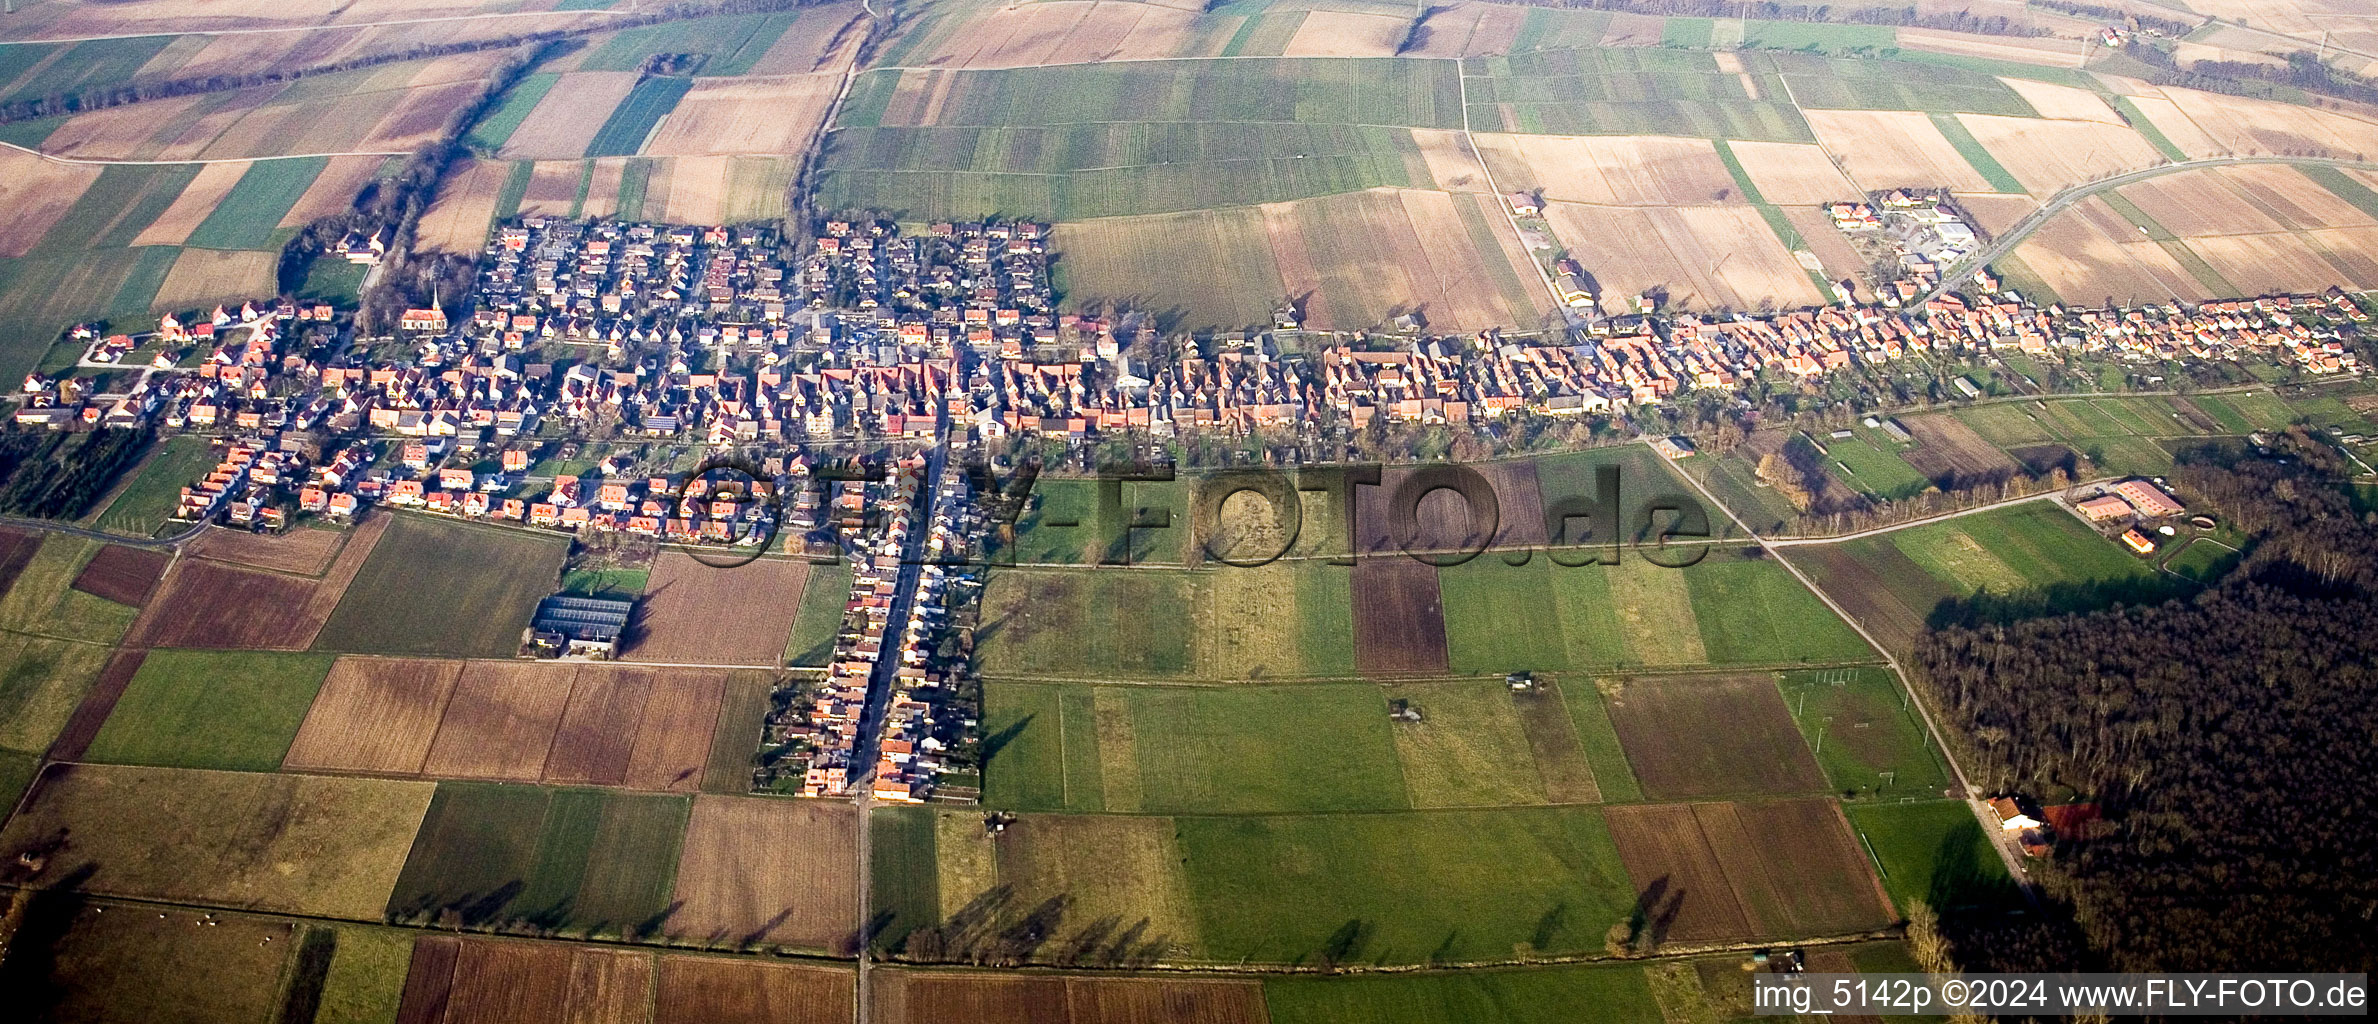 Circumferential , horizontally adjustable 360 degree perspective Village - view on the edge of agricultural fields and farmland in Freckenfeld in the state Rhineland-Palatinate